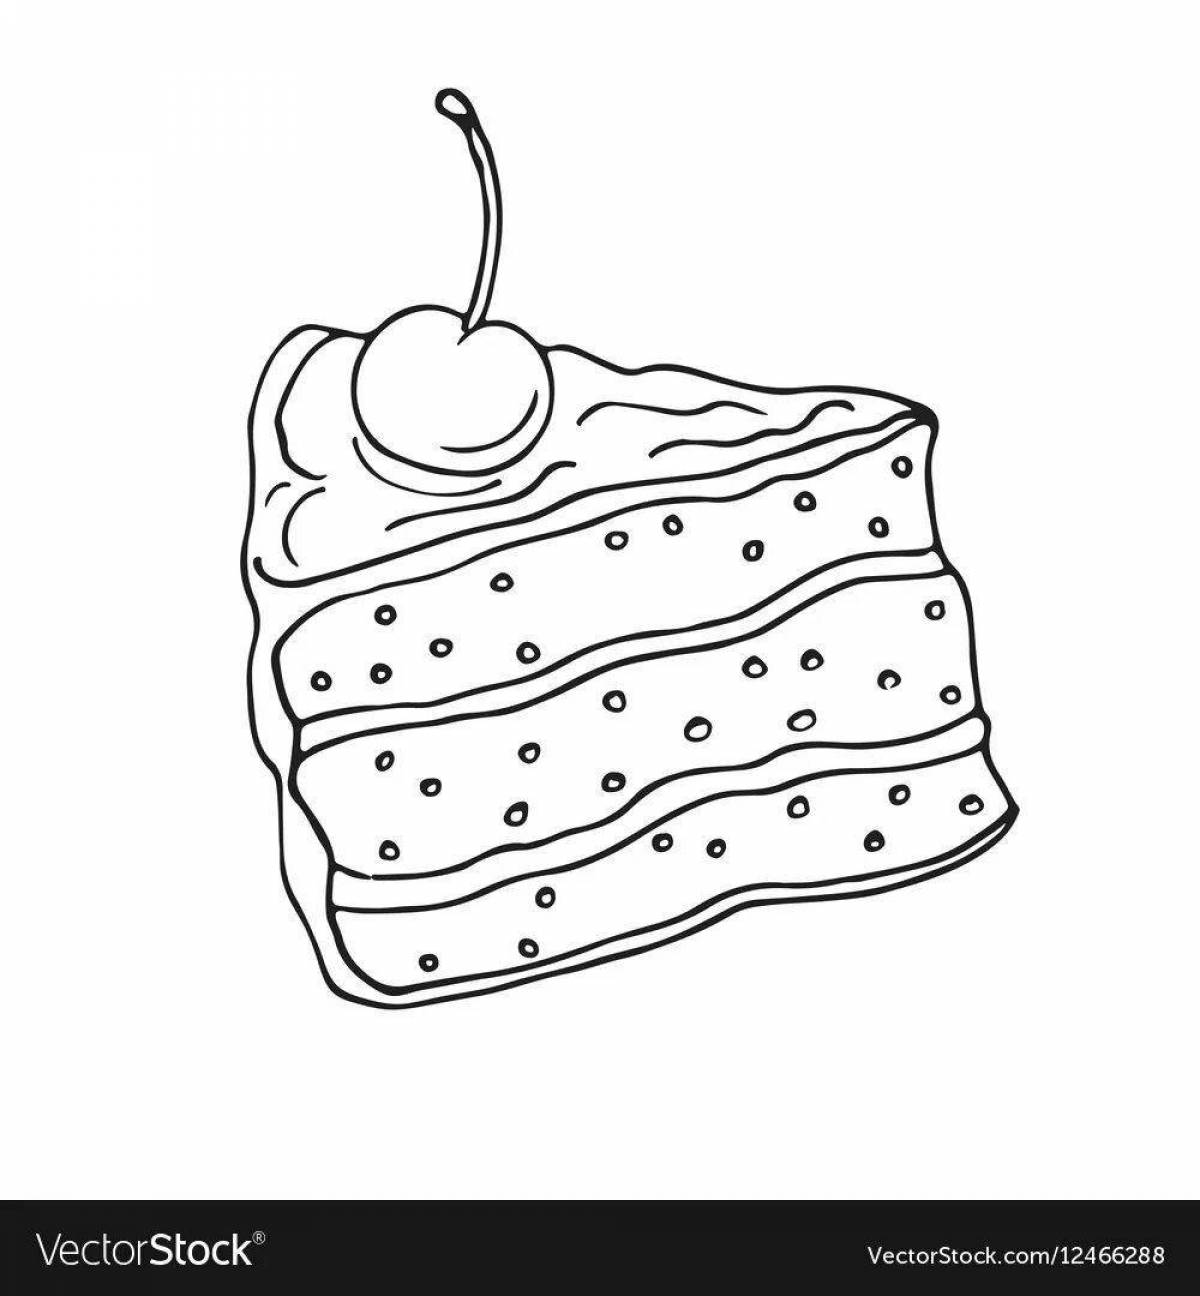 Scented chocolate cake coloring page